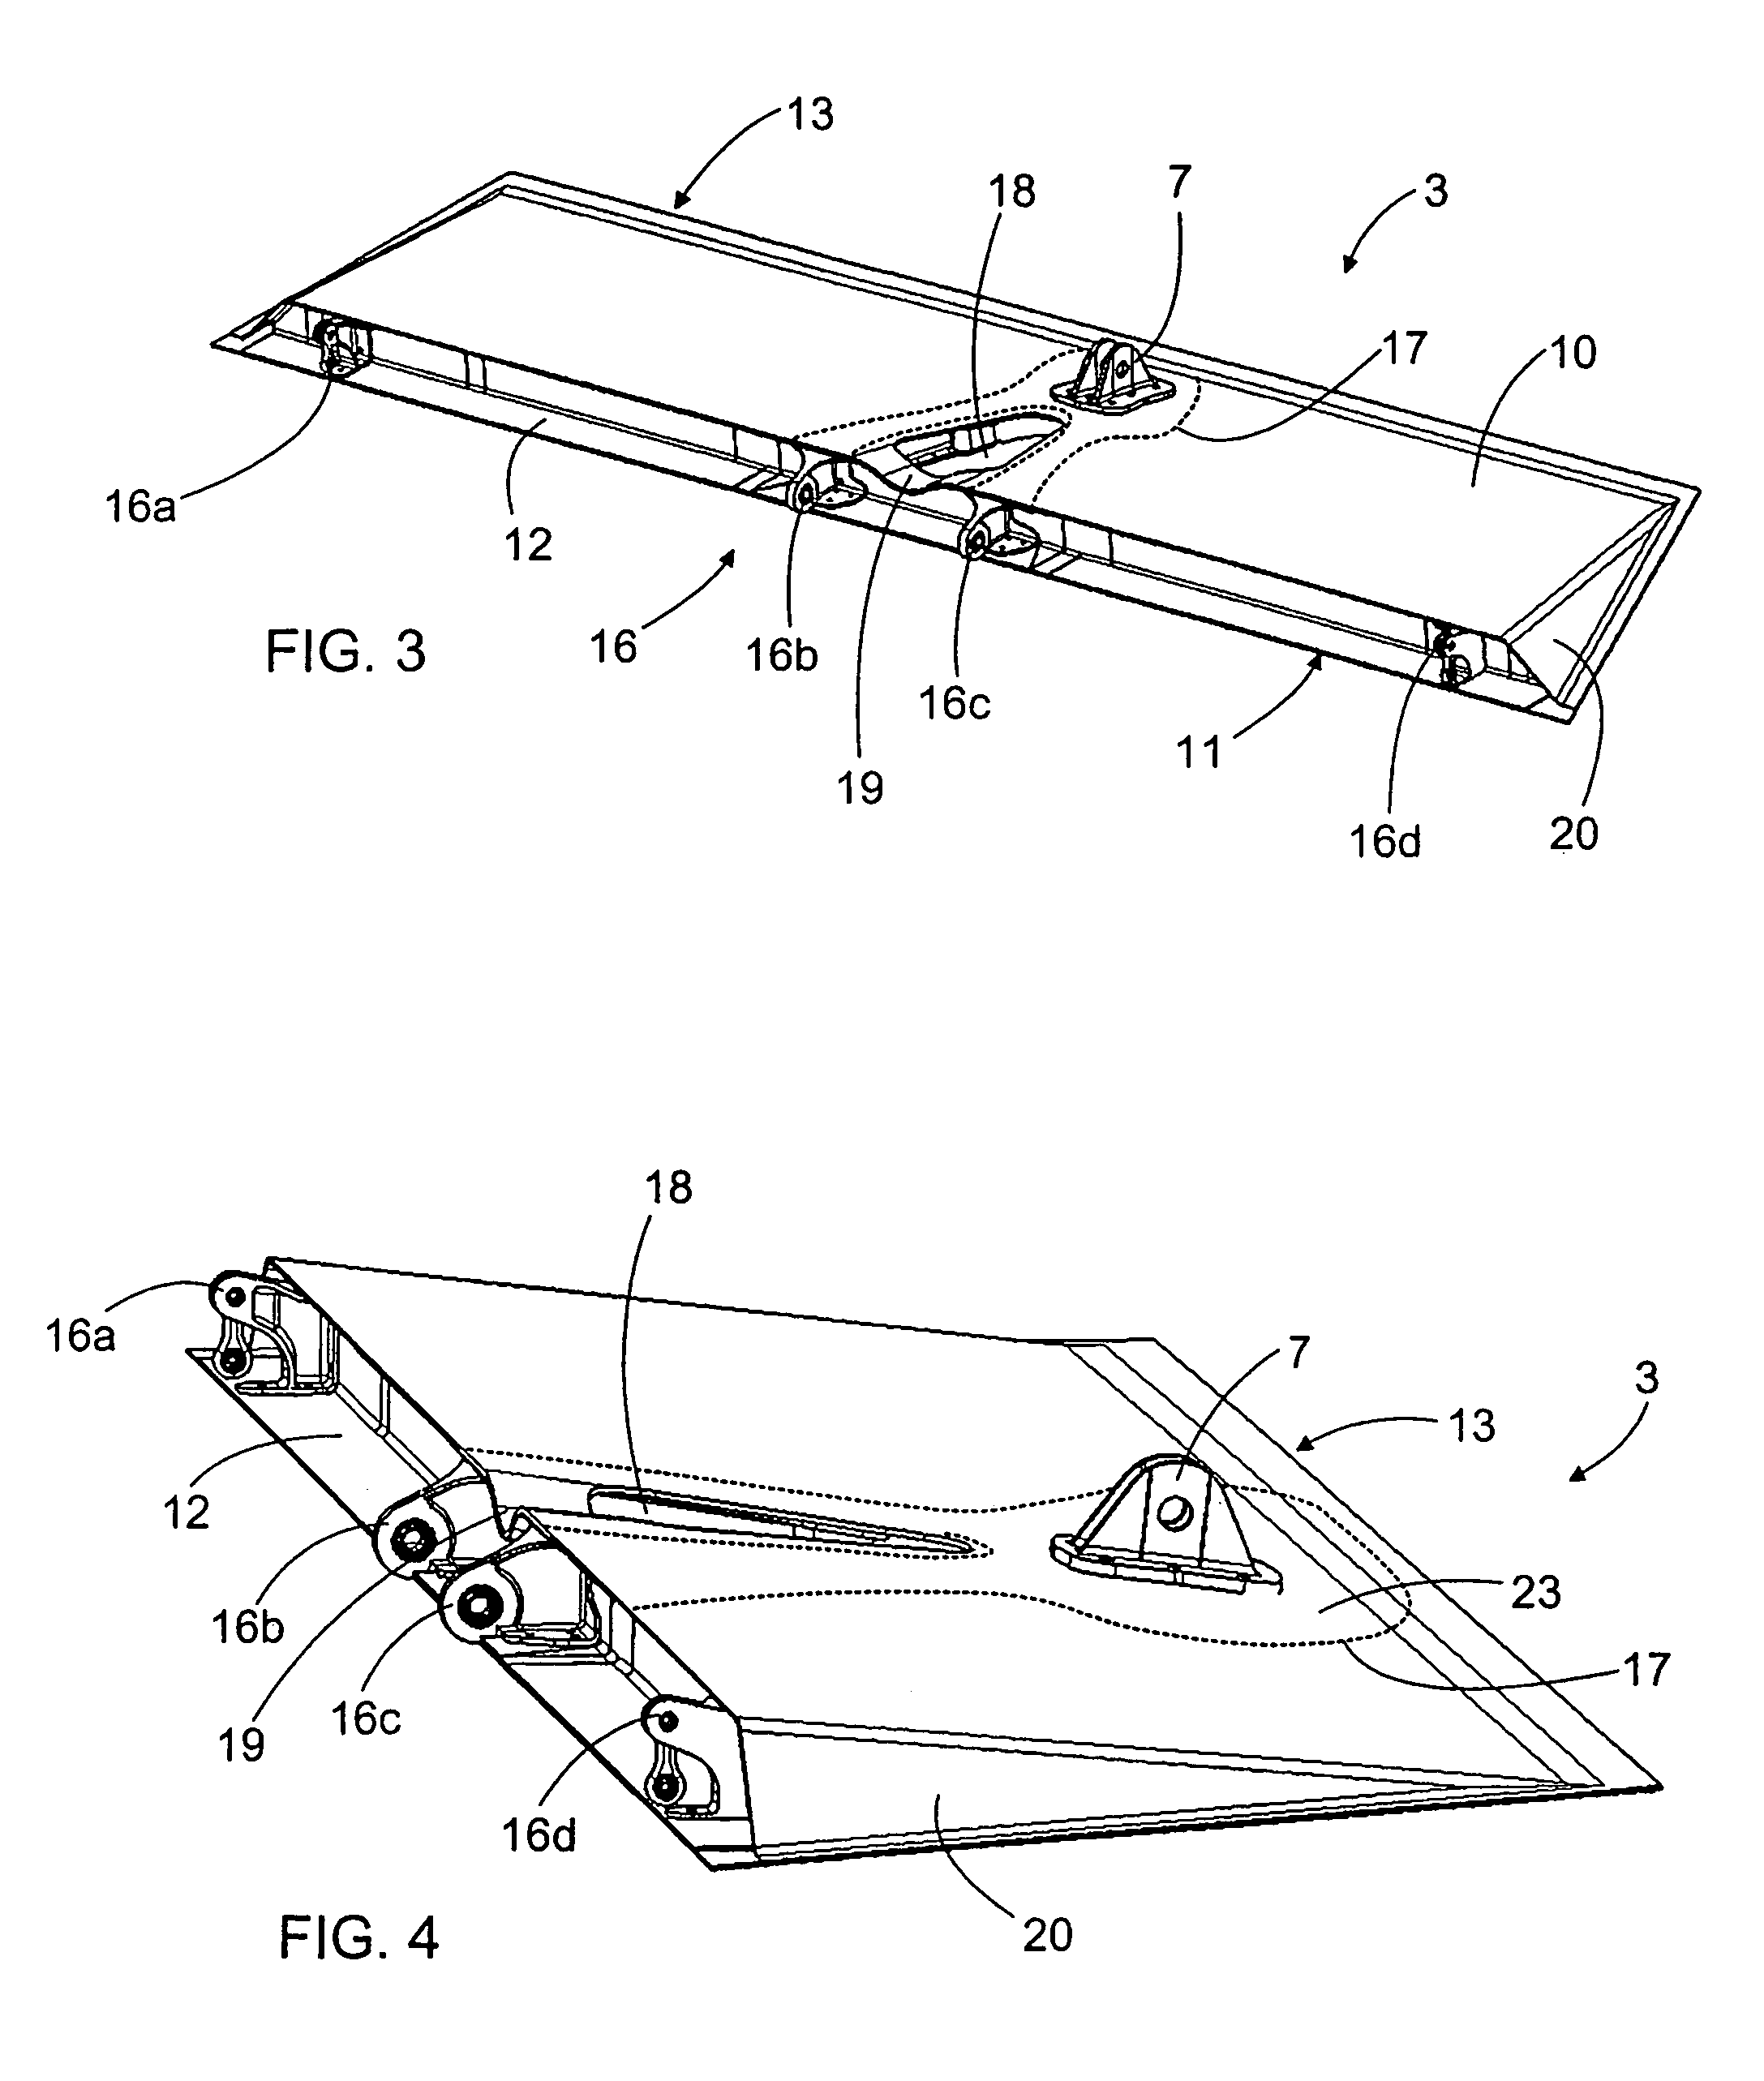 Pivoting panel for aircraft, and composite support piece